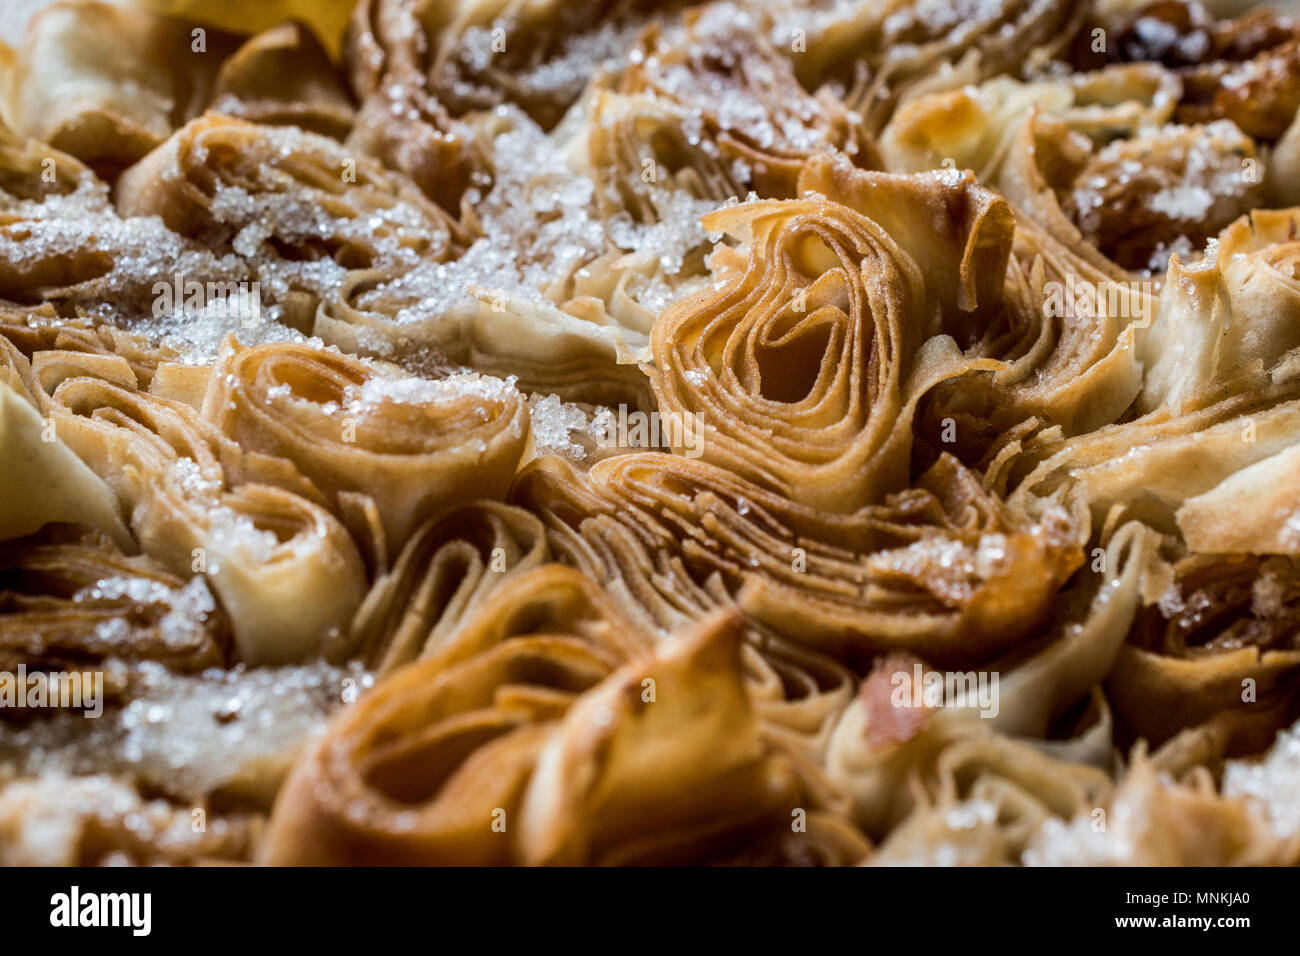 Turkish dessert From Artvin called Silor / Rolled and Fried phyllo with powdered sugar. Stock Photo